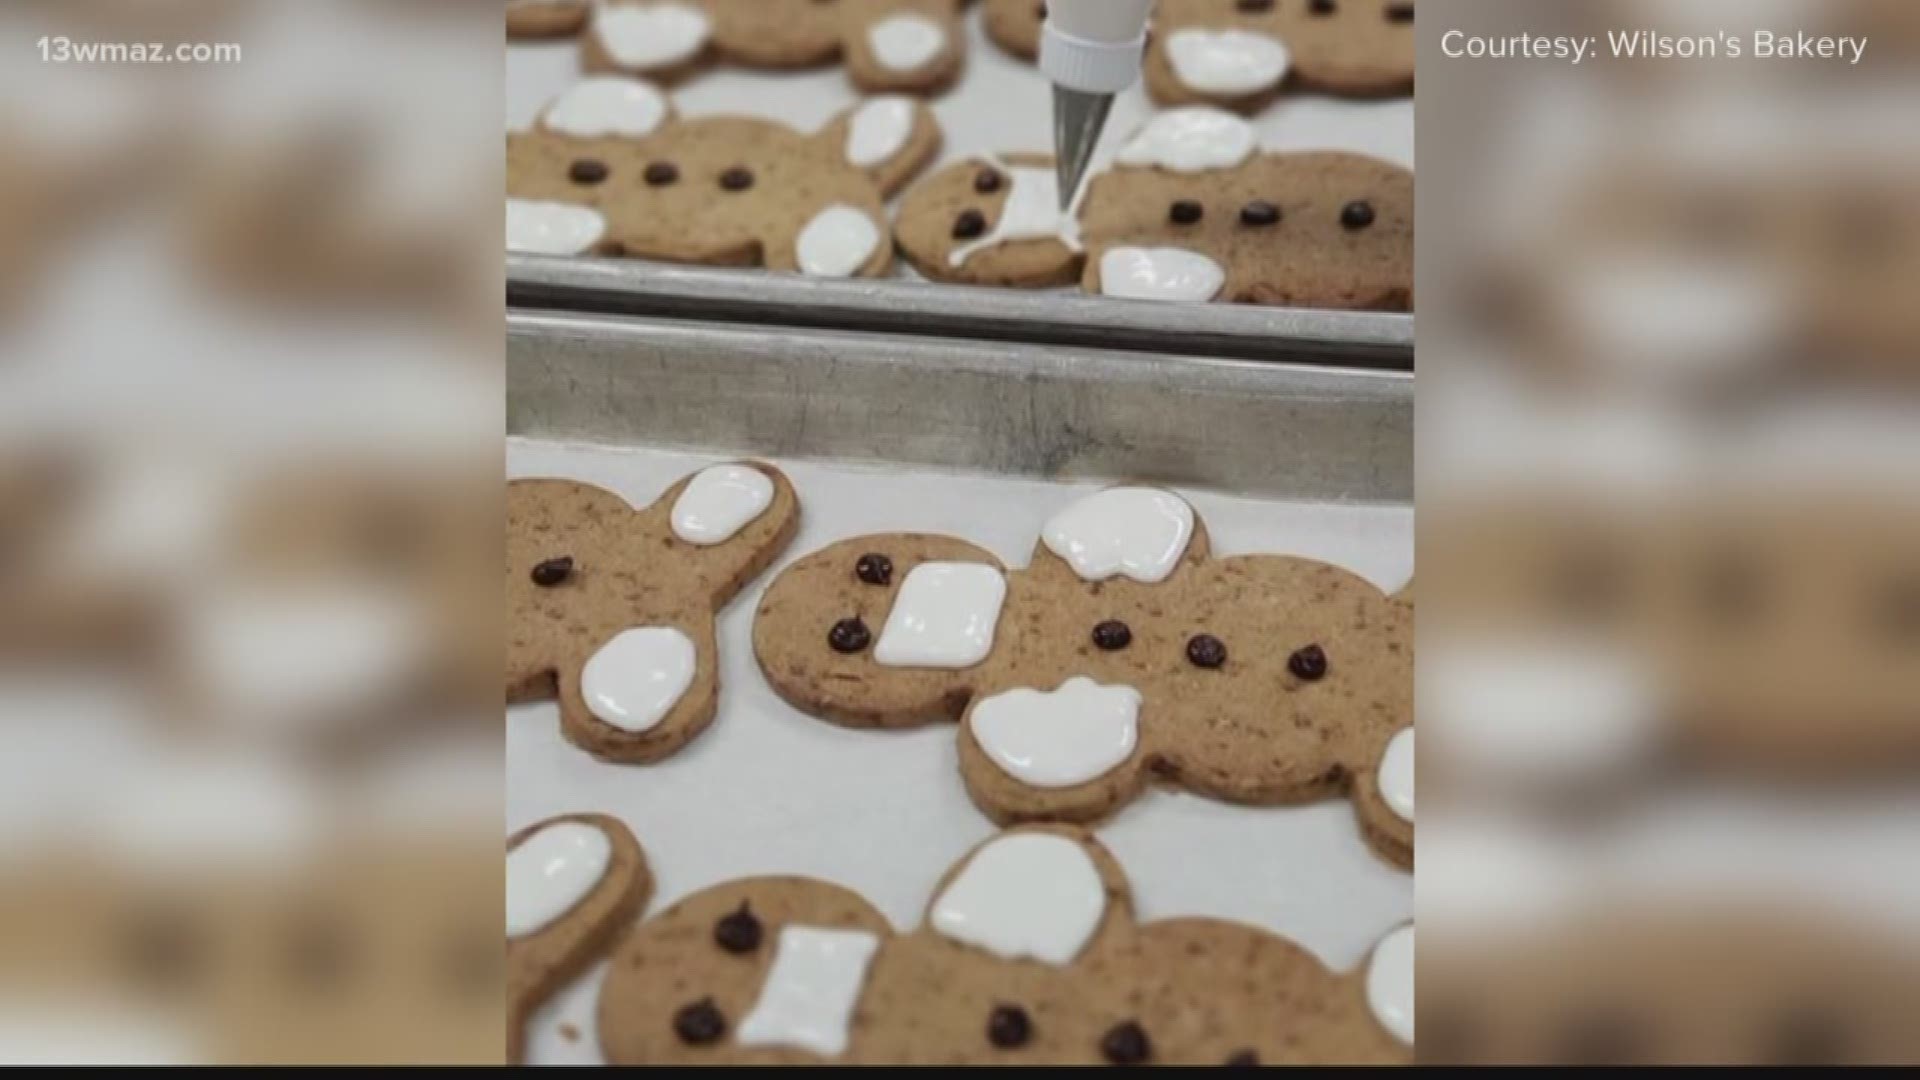 Why not social distance and satisfy your sweet tooth at the same time? At Wilson's Bakery, you can snack on a quarantine-themed gingerbread man.